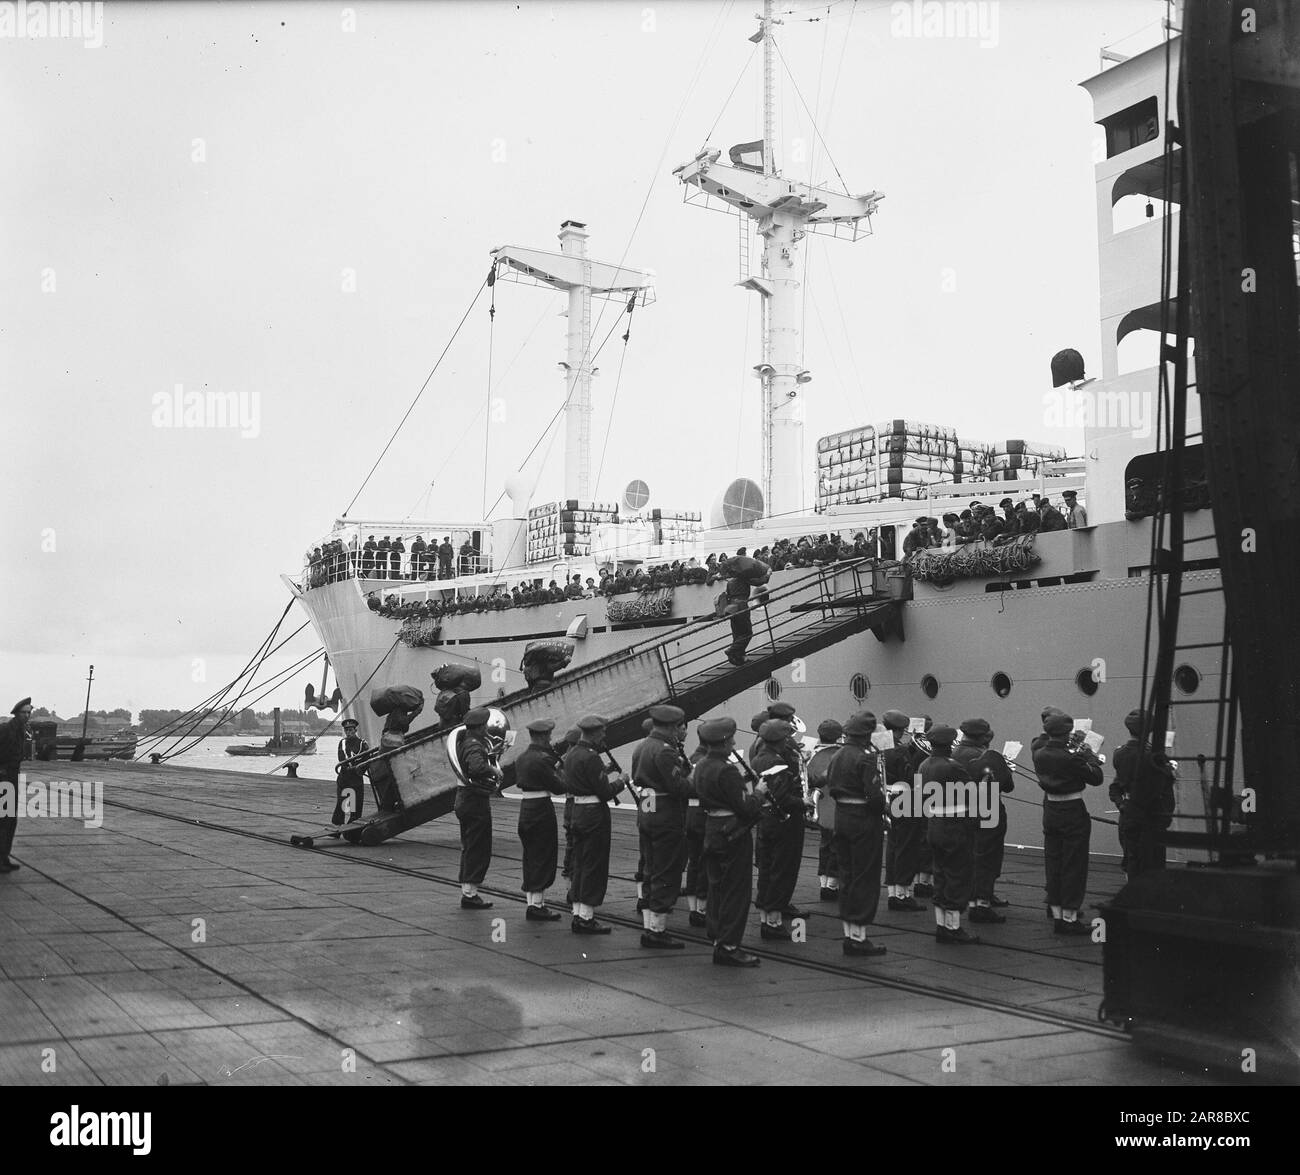 ships, arrival, greetings, quays Date: undated Keywords: arrival, greetings, quays, ships Stock Photo